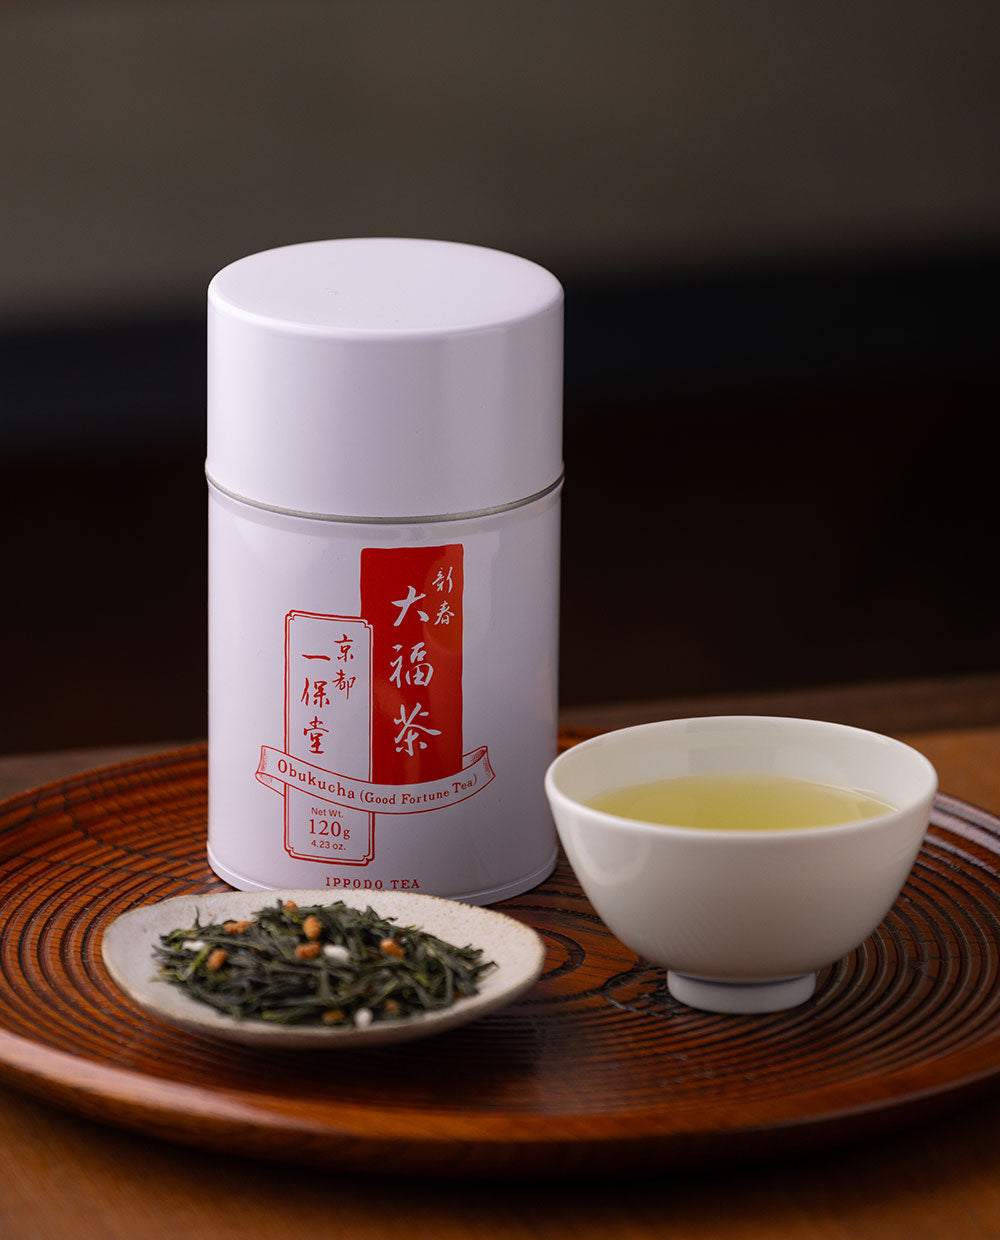 Now Available: Special blend genmaicha, Obukucha